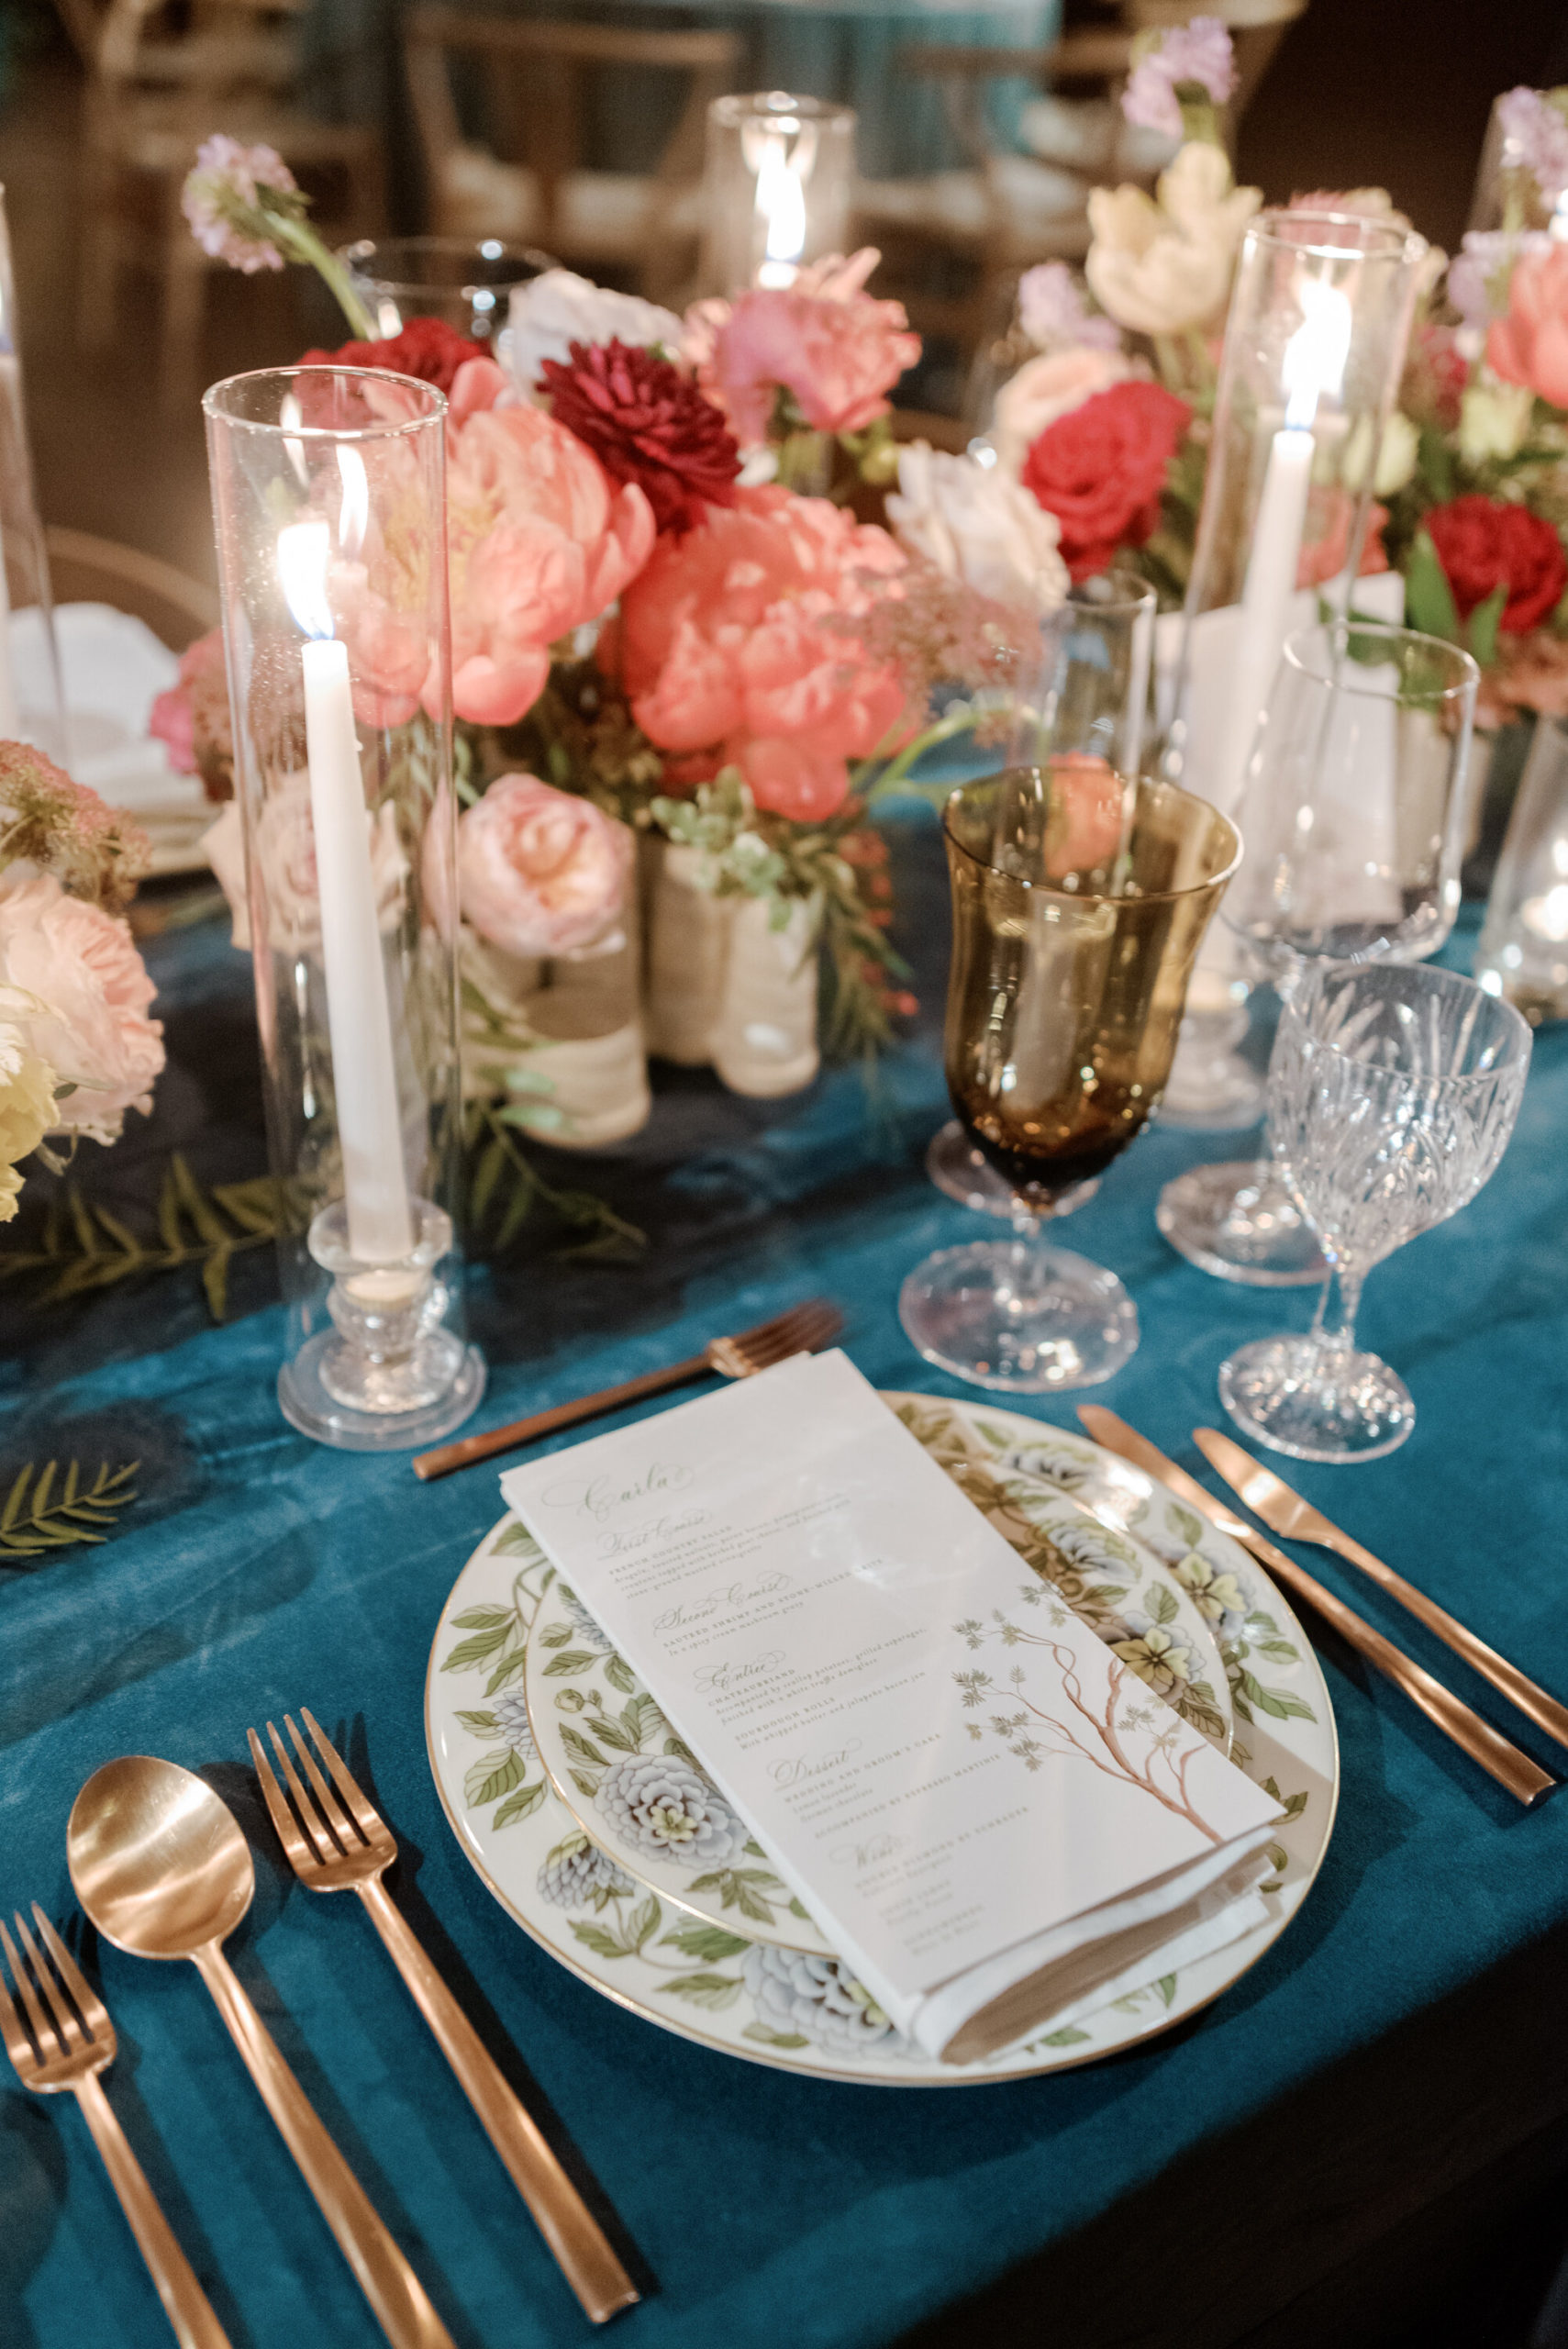 Tabletop Inspiration - Heirloom China Paired with Modern Elements